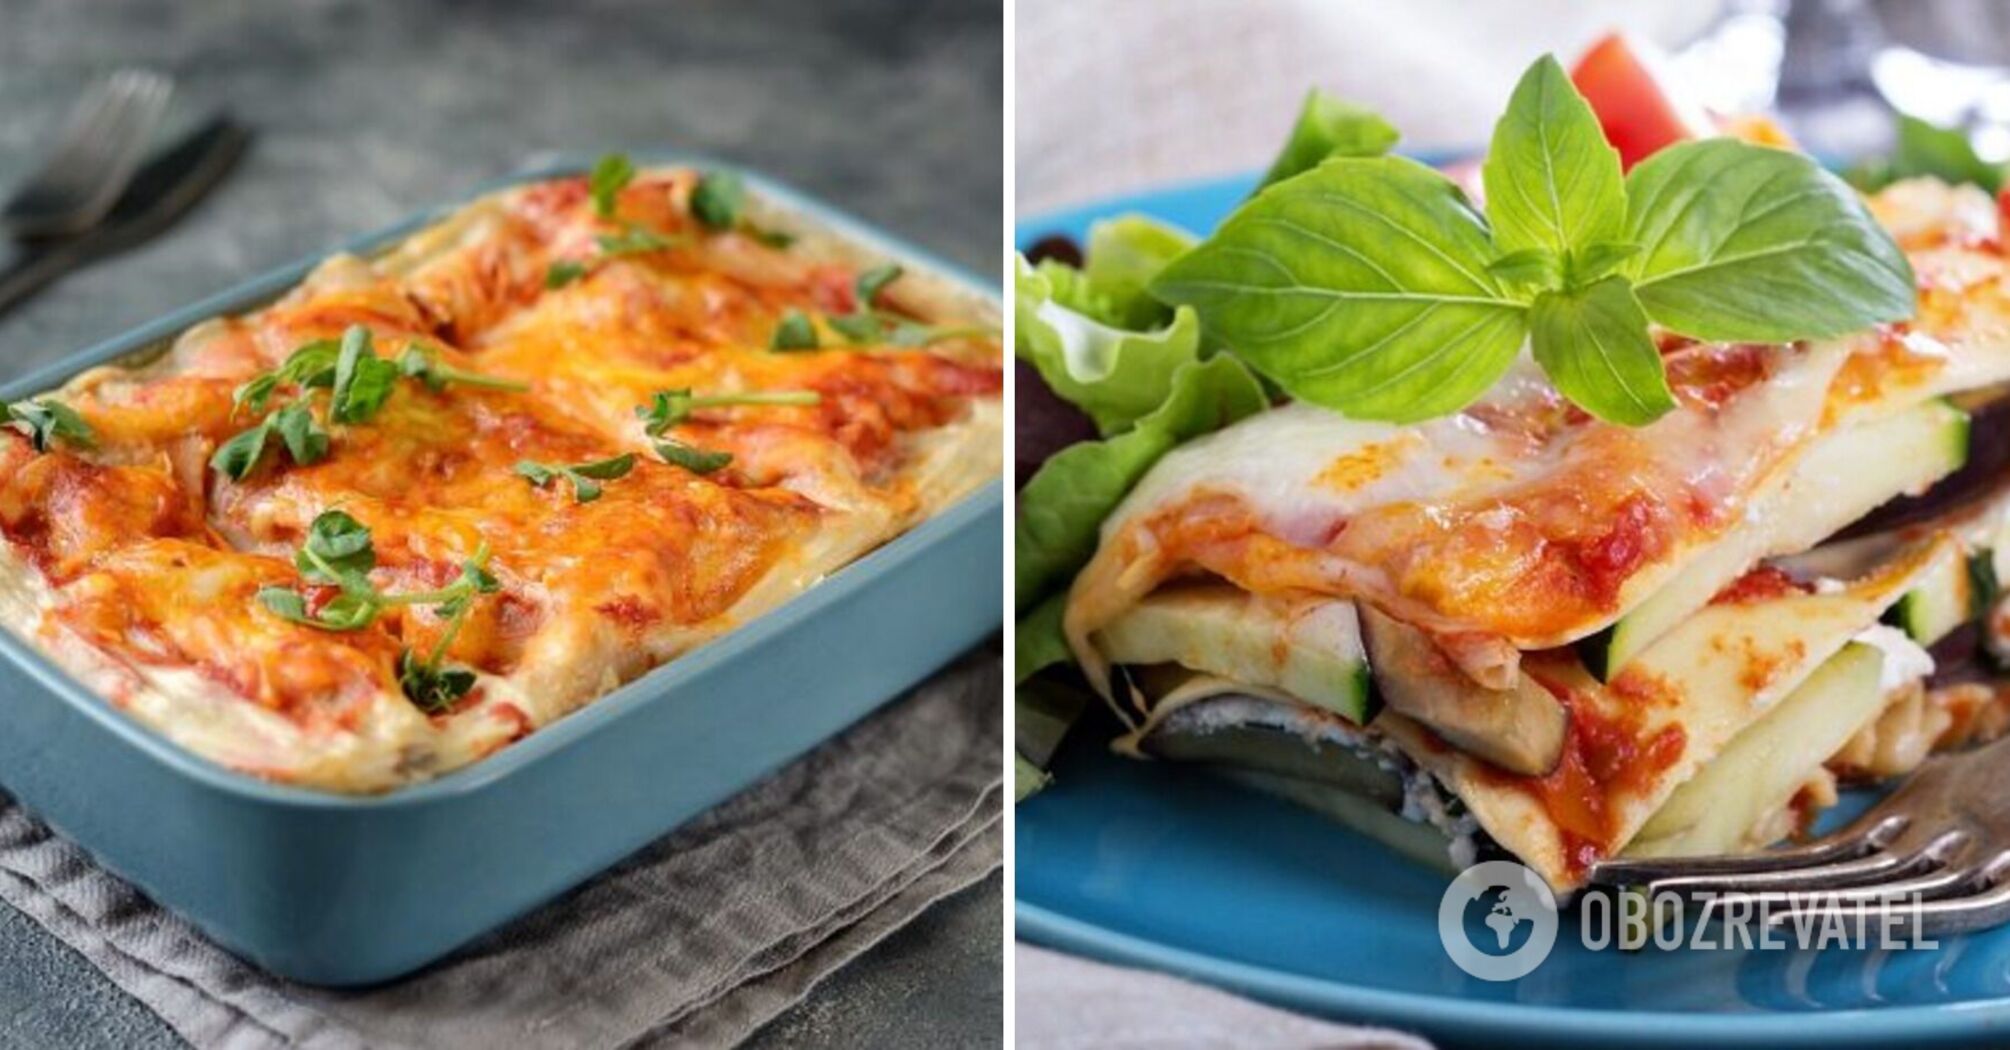 Easy vegetable lasagna recipe in 30 minutes: everyone can cook it